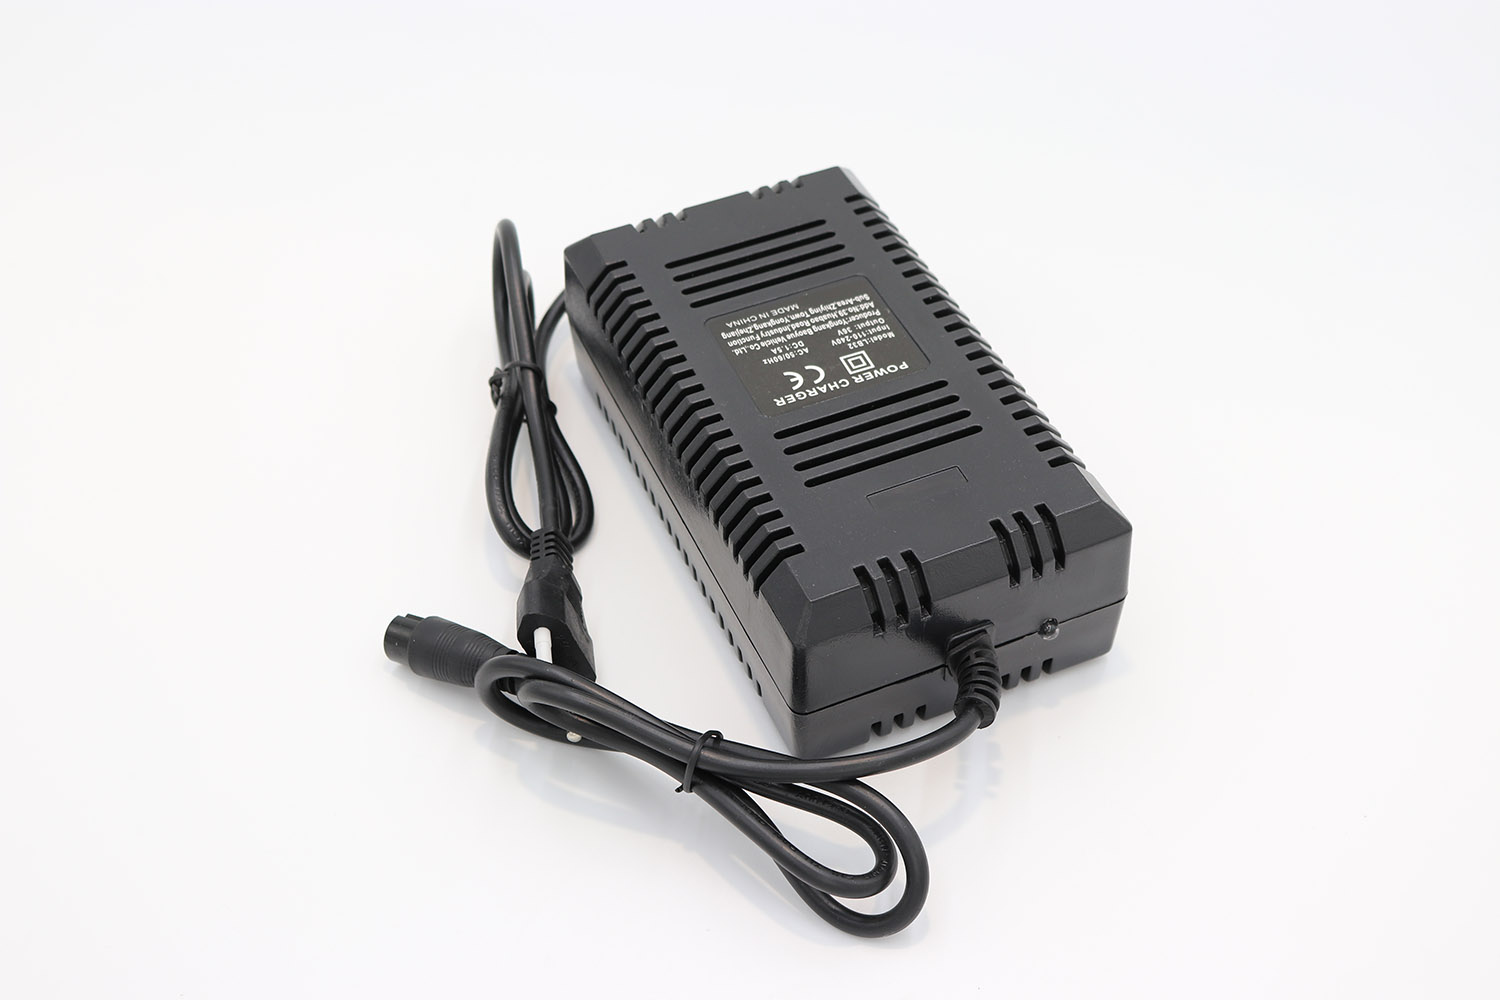 https://minibikes.store/image/catalog/aparts5/battery-charger-36v-1.5a-for-electric-quad-cross-pocket-bike%20(2).jpg